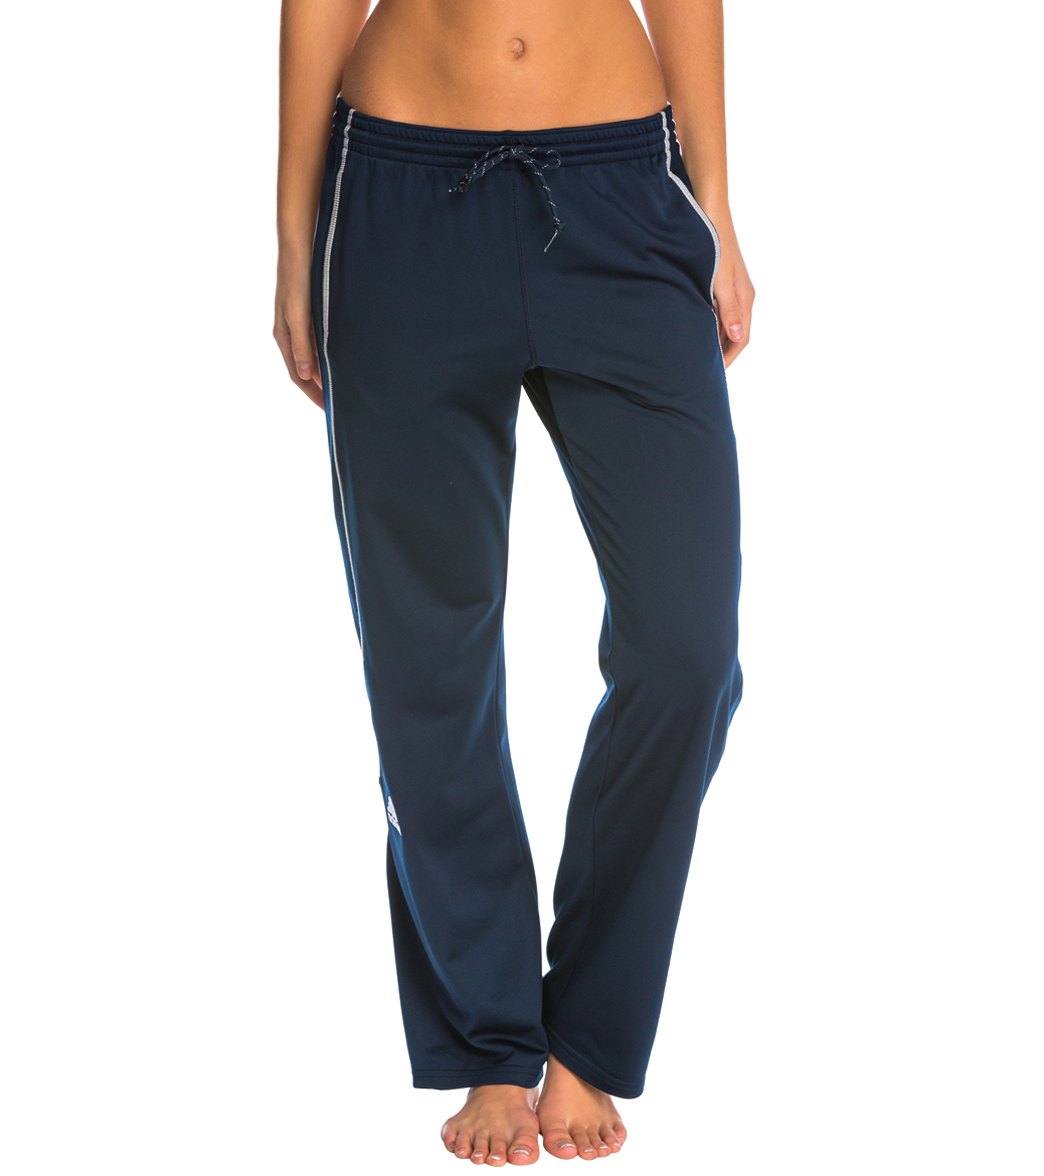 Adidas Women's Utility Warm Up Pants - Navy Xl Polyester - Swimoutlet.com